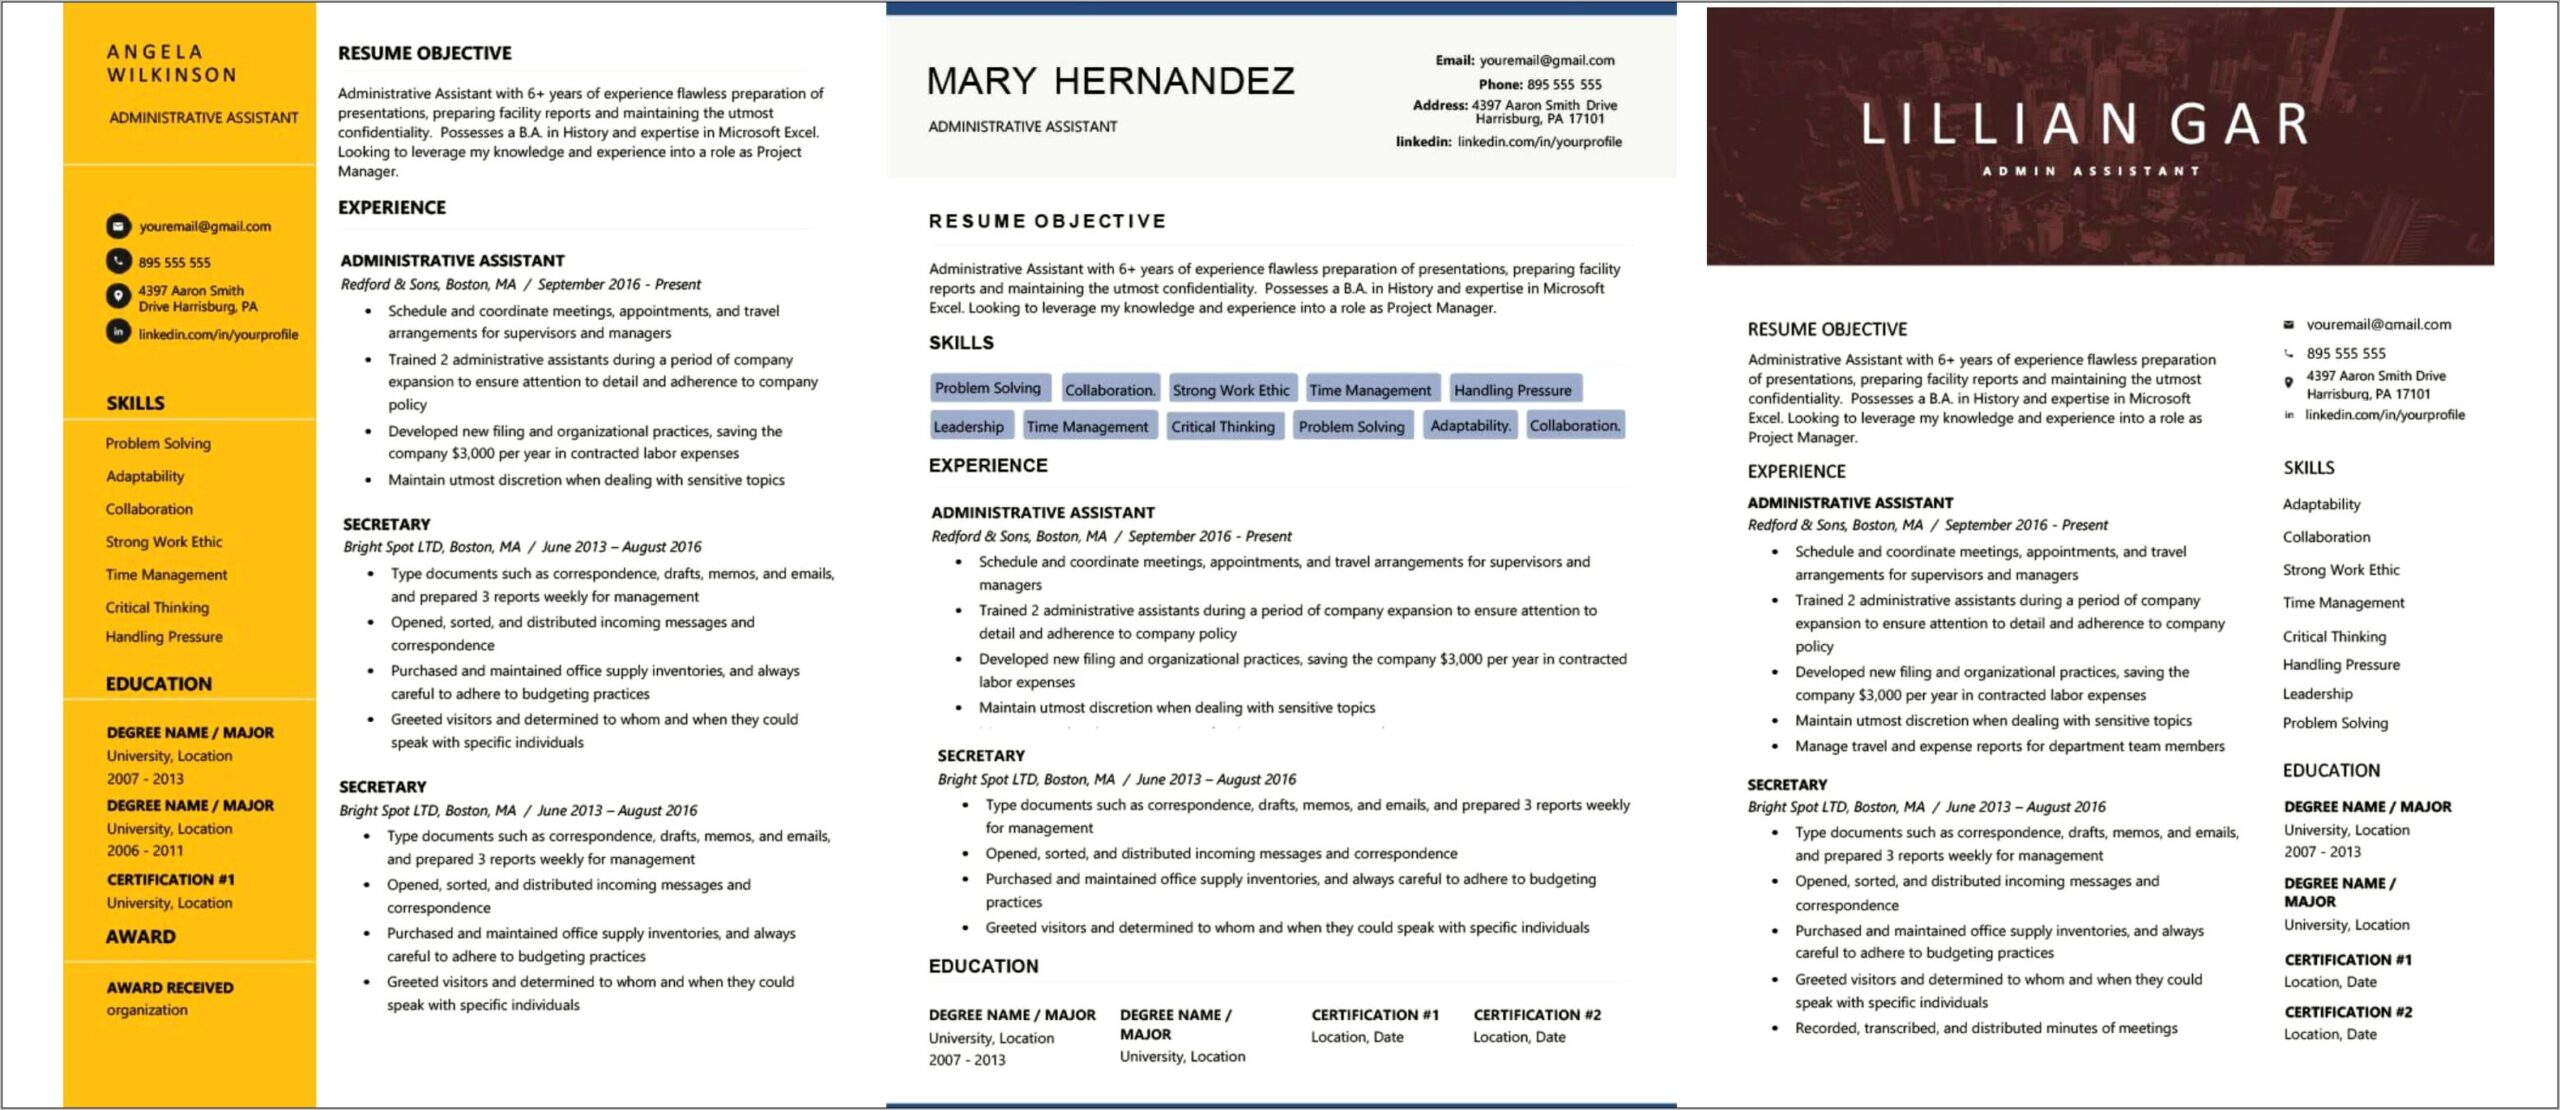 Professional Introduction Resume Years Of Experience